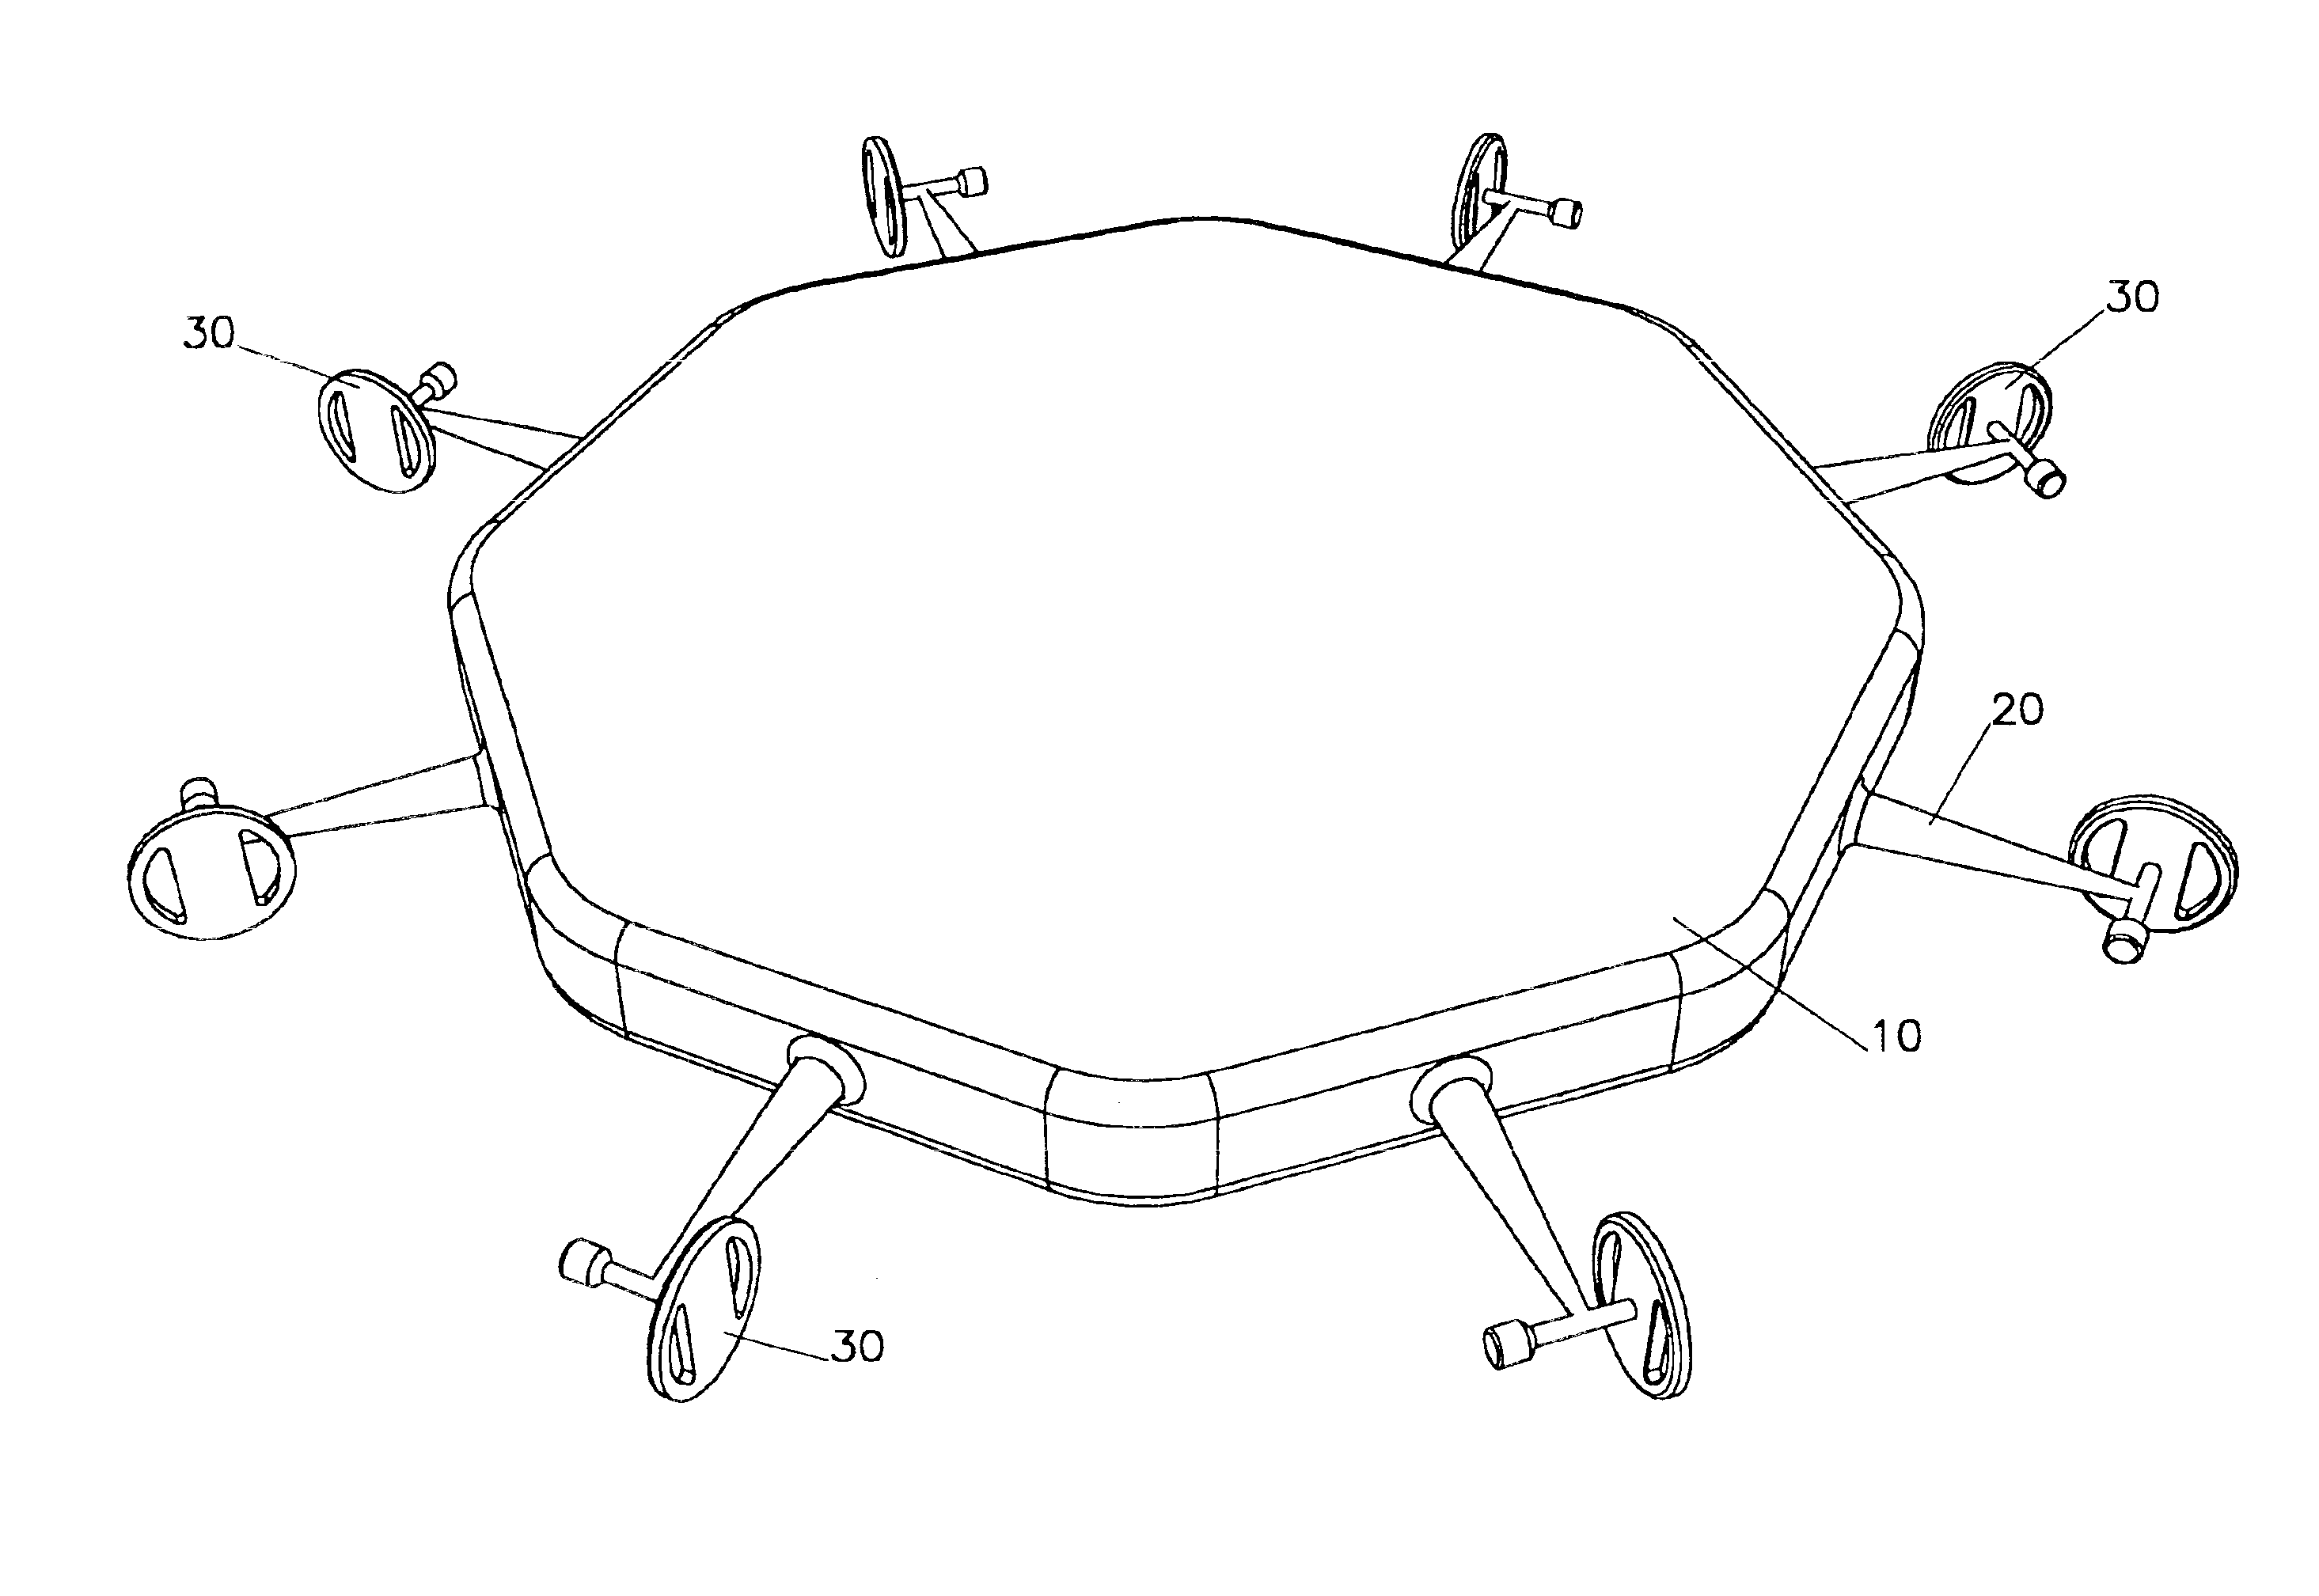 Device for determining a length of a middle ear prosthesis